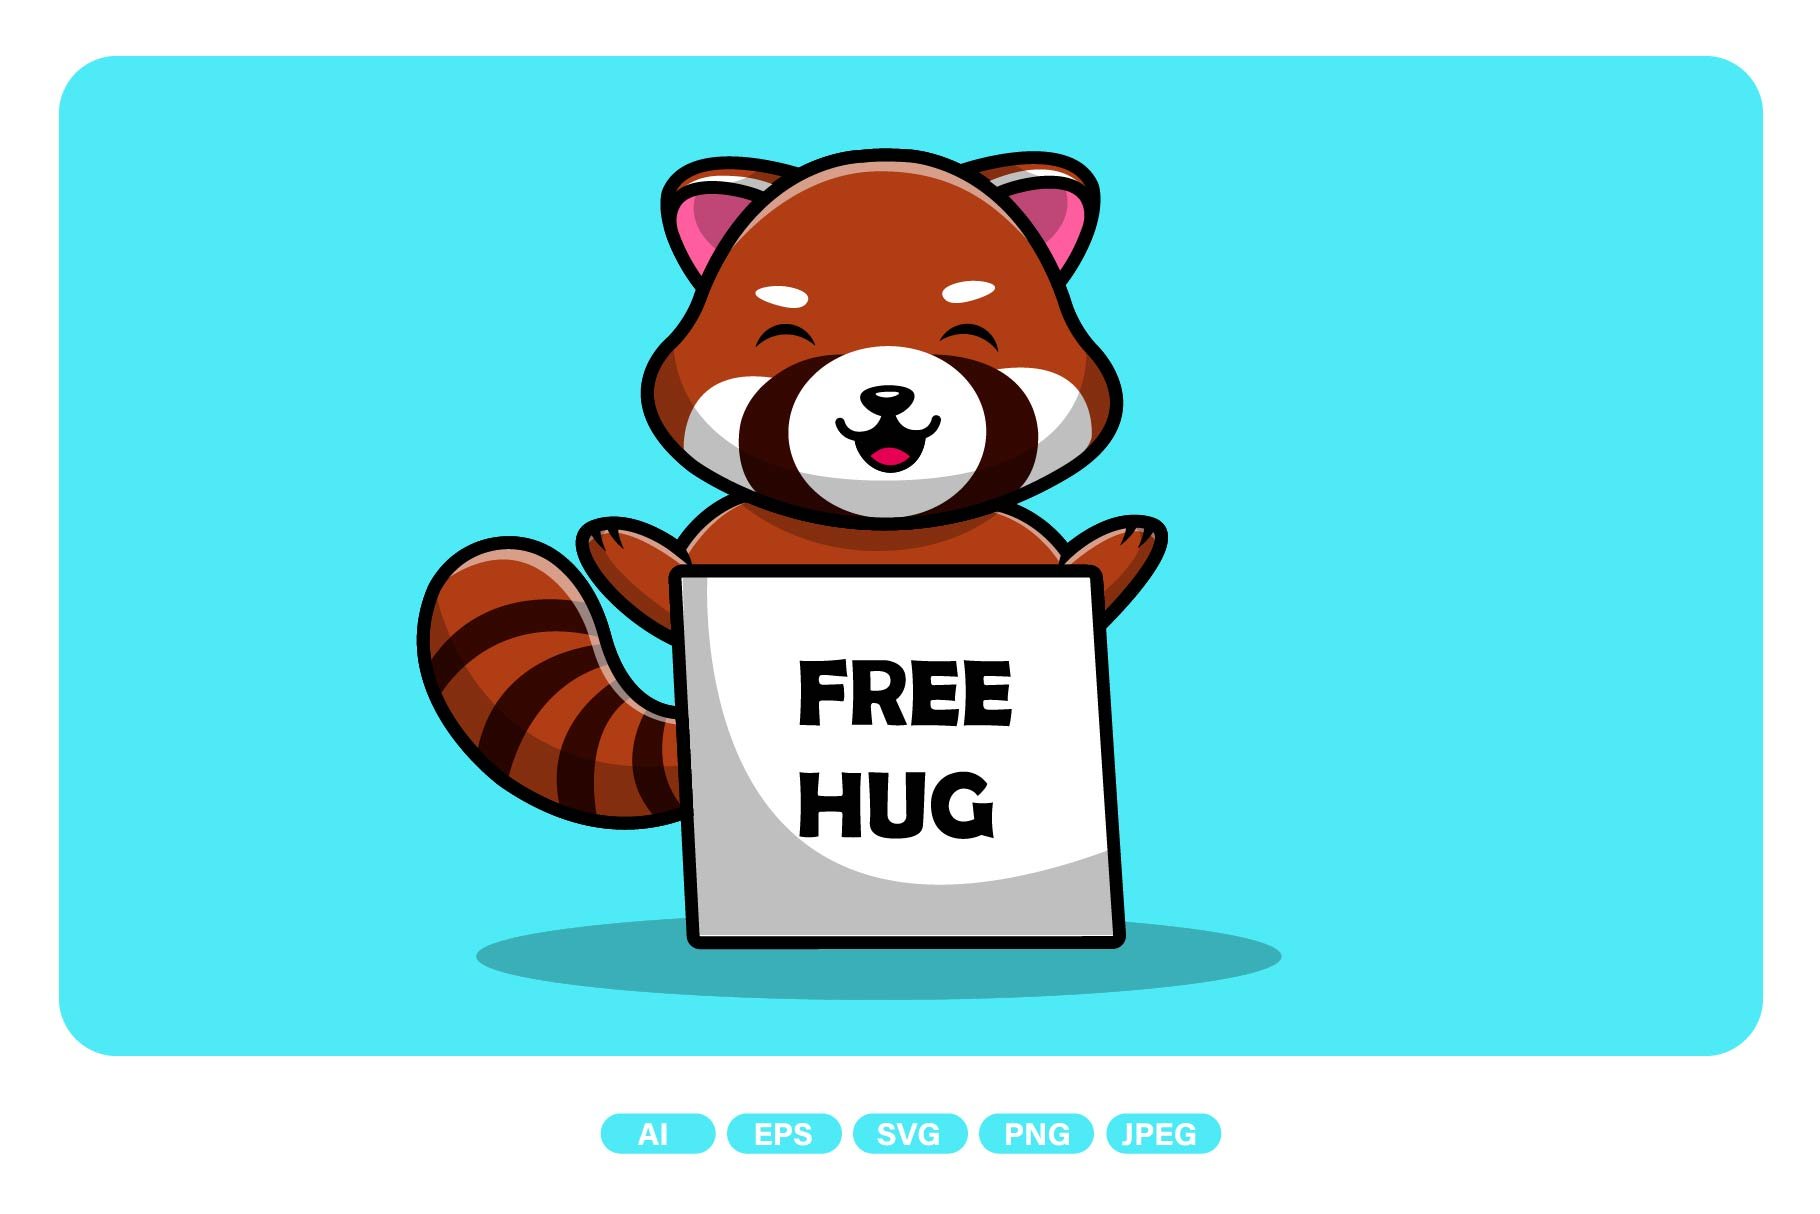 Cute Red Panda With Free Hug Board cover image.